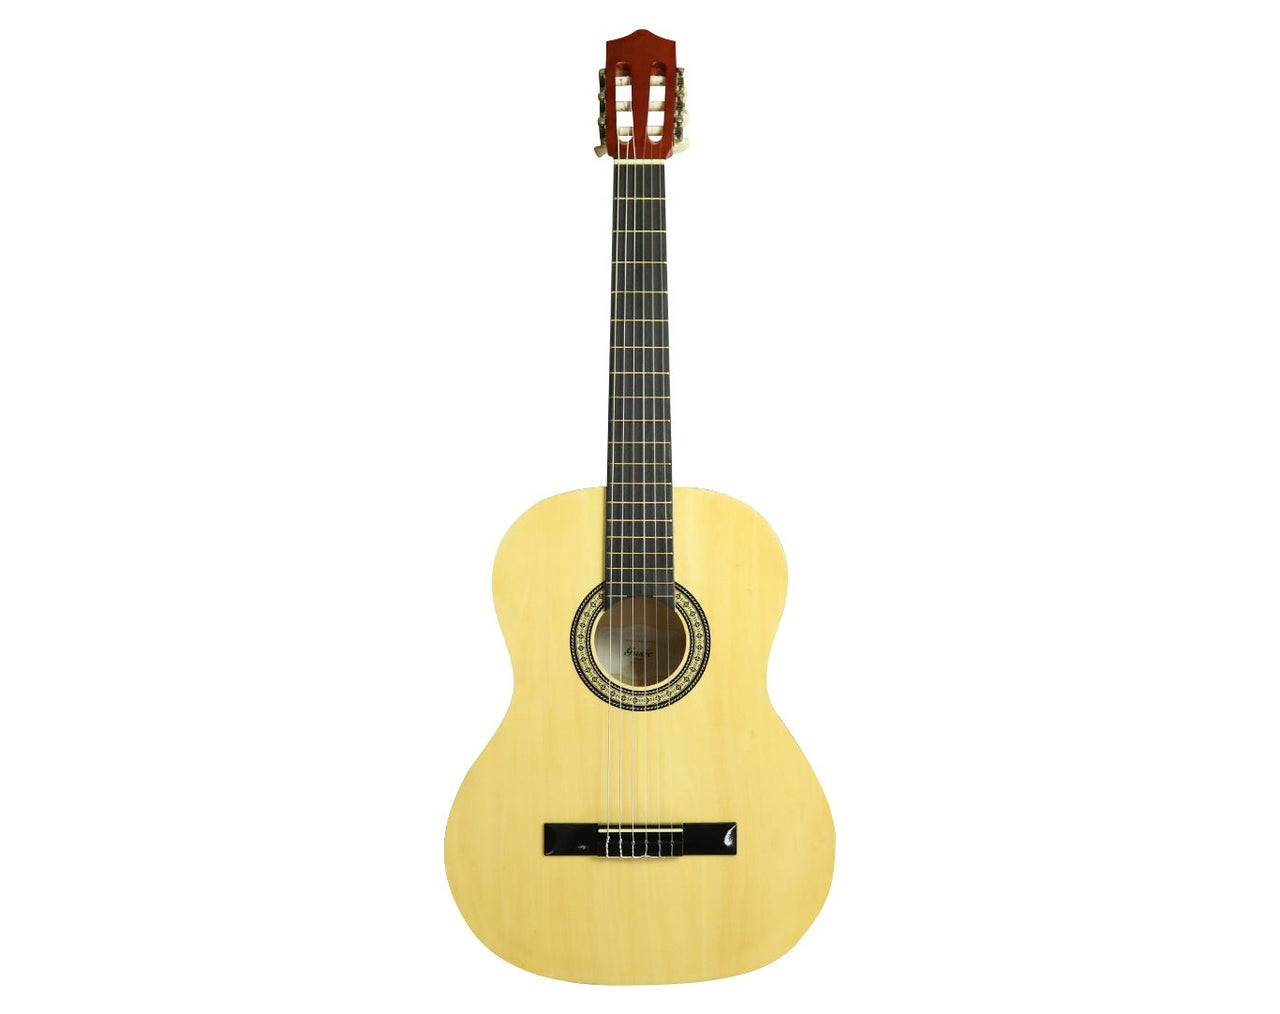 39" Classic Acoustic Guitar Natural Finish GCGD-3901